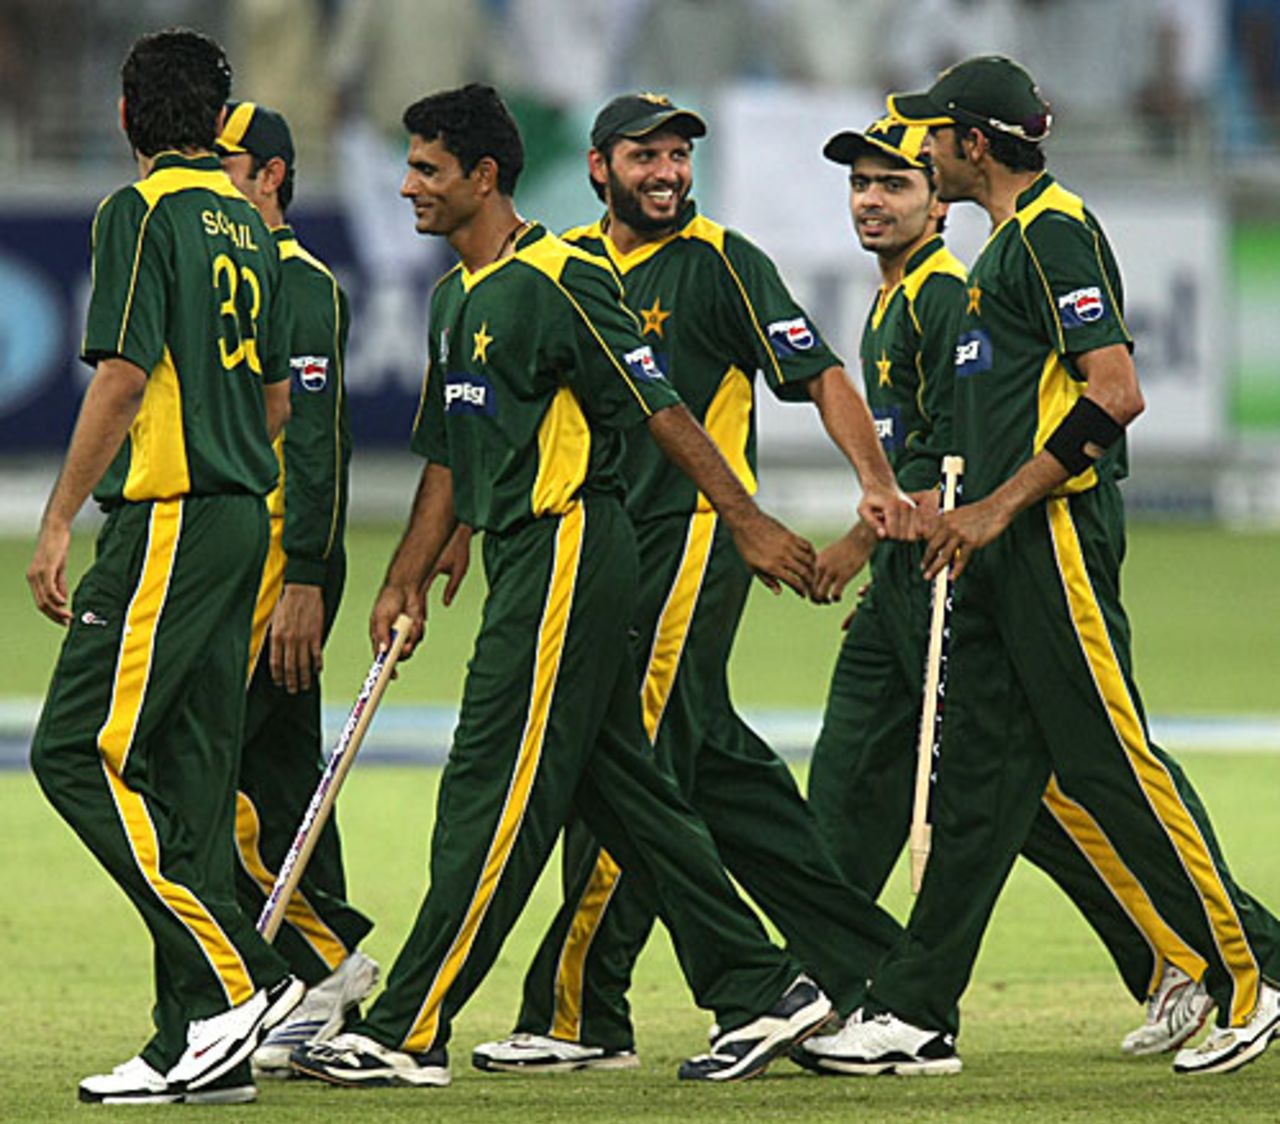 Pakistan are a relieved bunch at the end of a close contest, Pakistan v New Zealand, 2nd Twenty20 International, Dubai, November 13, 2009